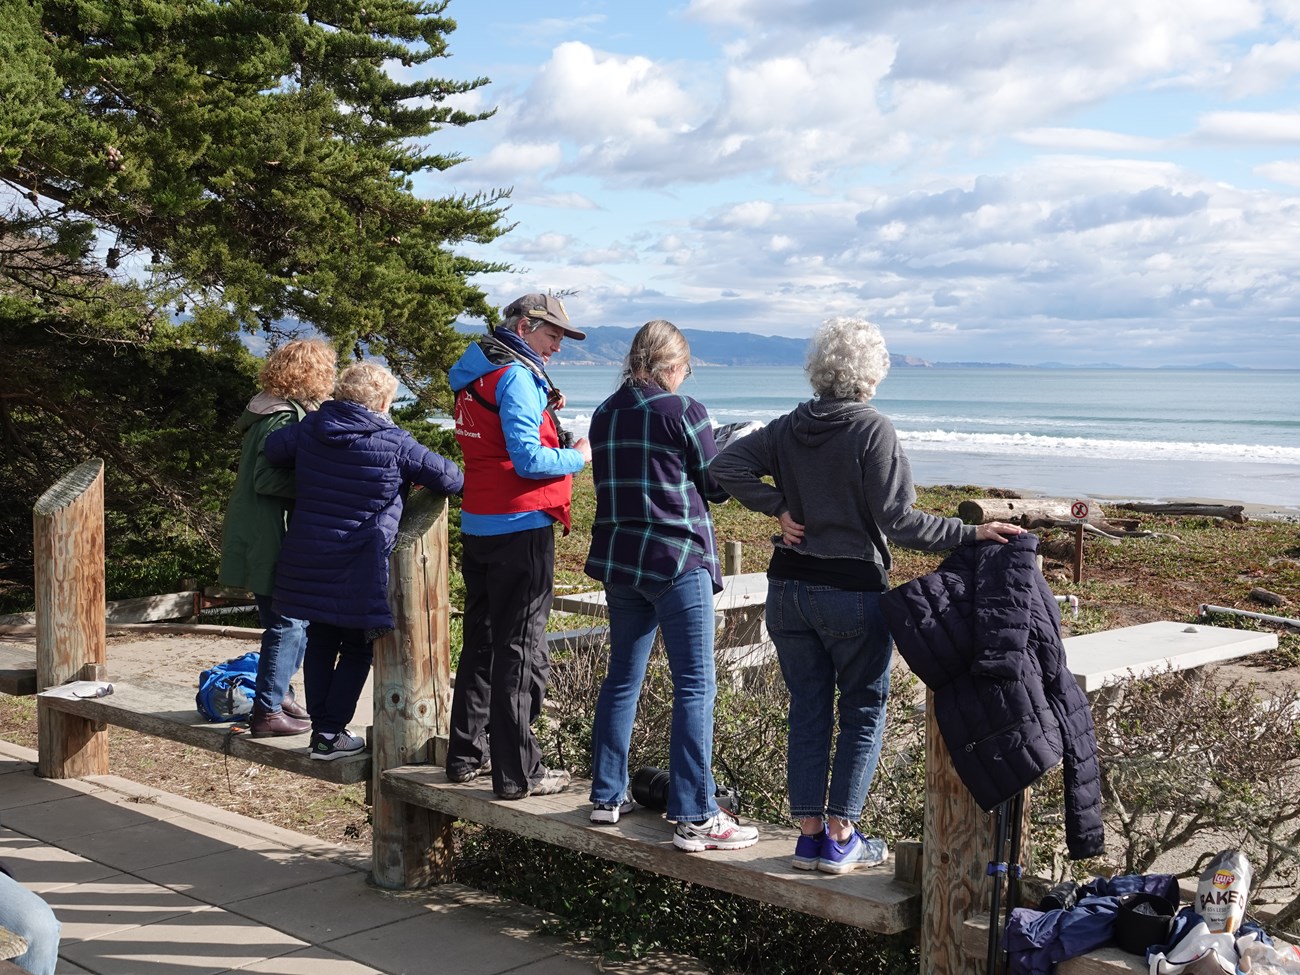 A volunteer in a red vest standing on a bench talks to park visitors near a beach.